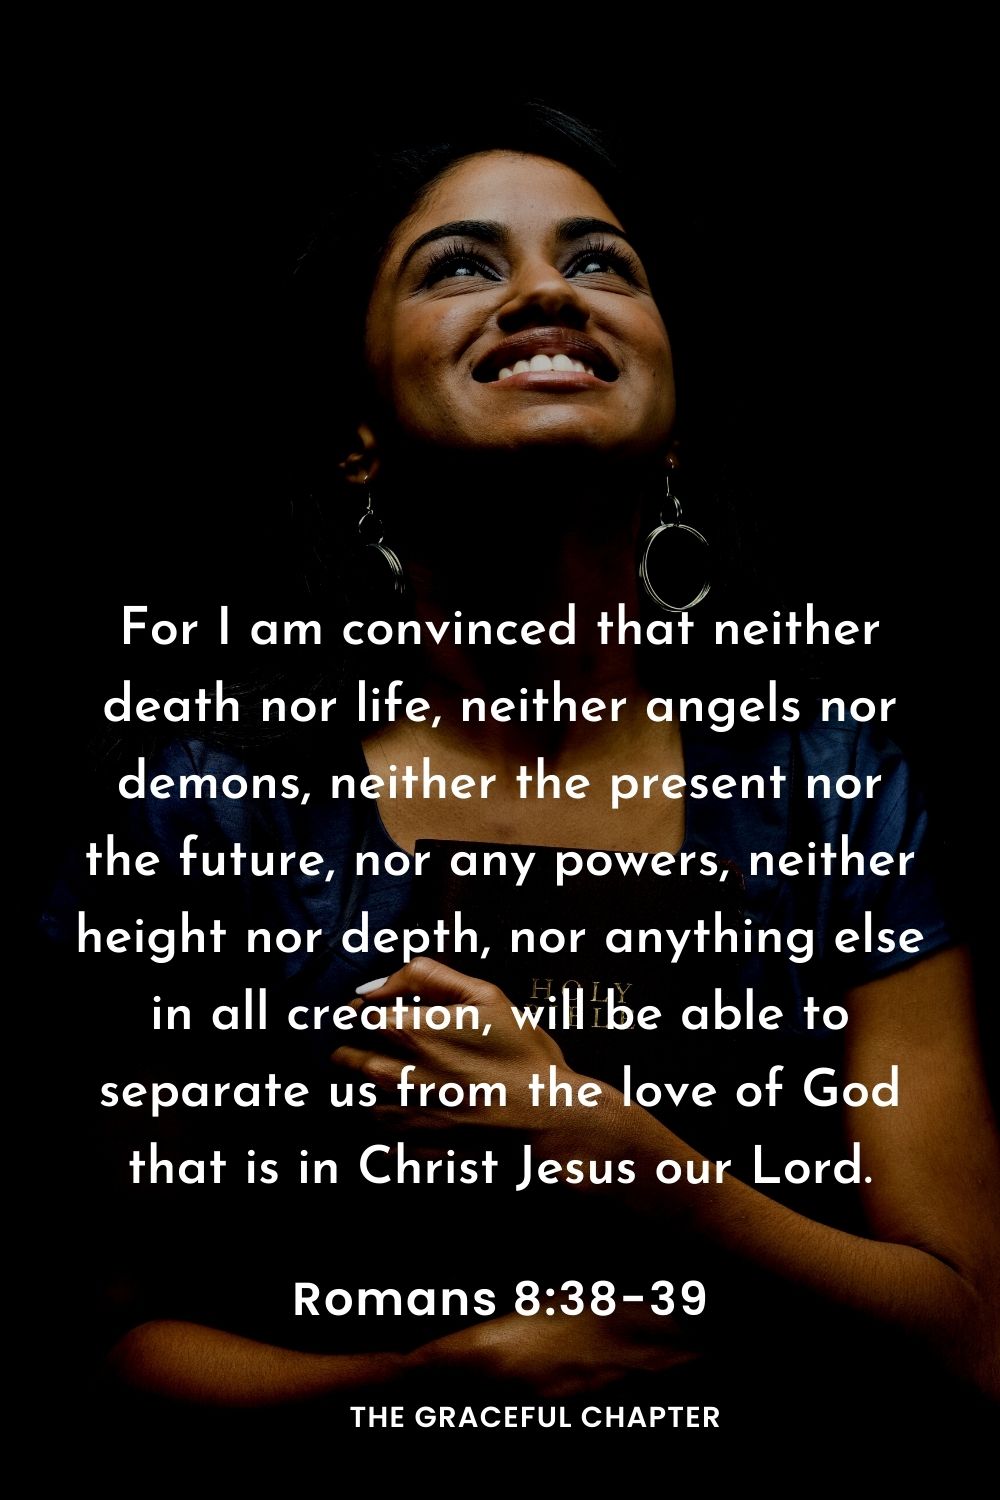 For I am convinced that neither death nor life, neither angels nor demons, neither the present nor the future, nor any powers, neither height nor depth, nor anything else in all creation, will be able to separate us from the love of God that is in Christ Jesus our Lord.